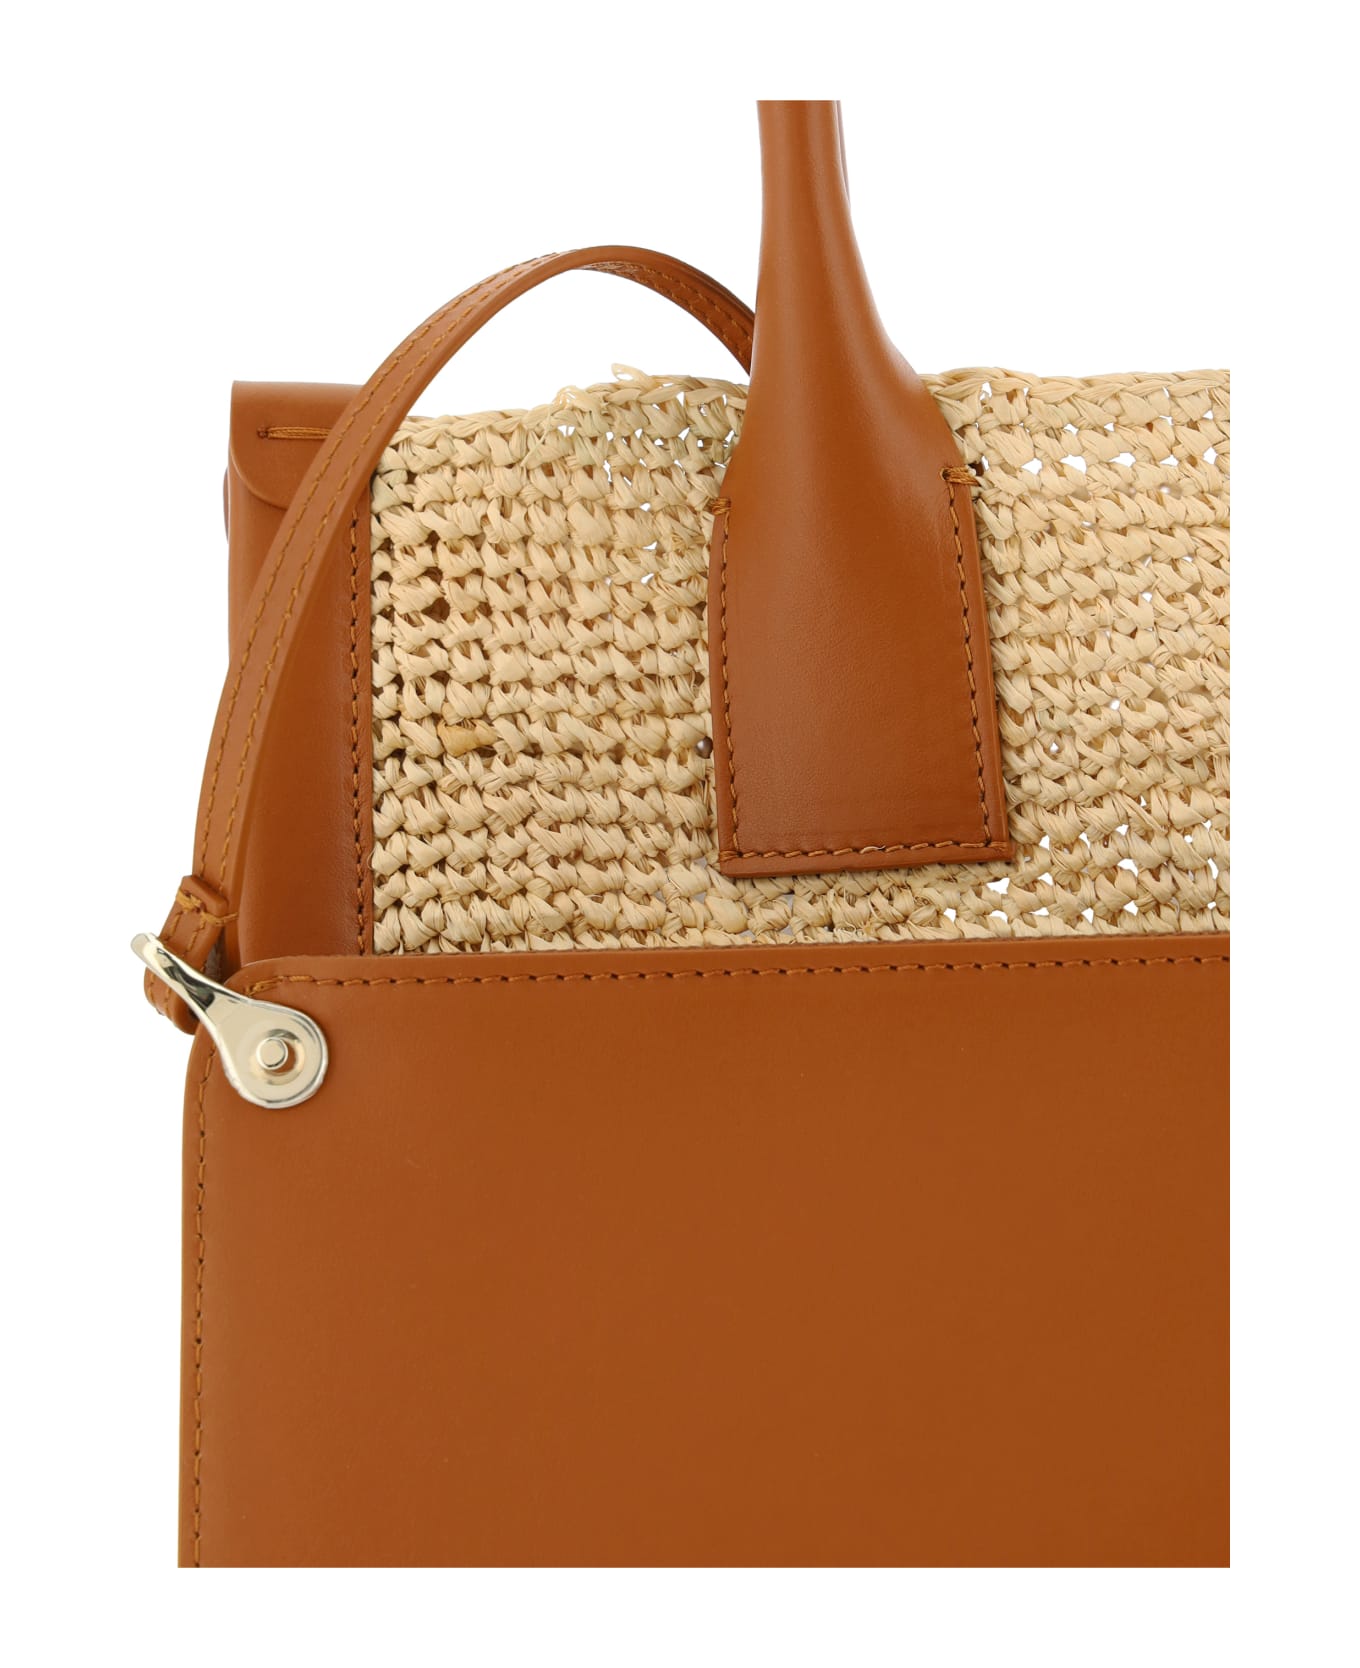 Christian Louboutin By My Side Small Handbag - Natural/cuoio